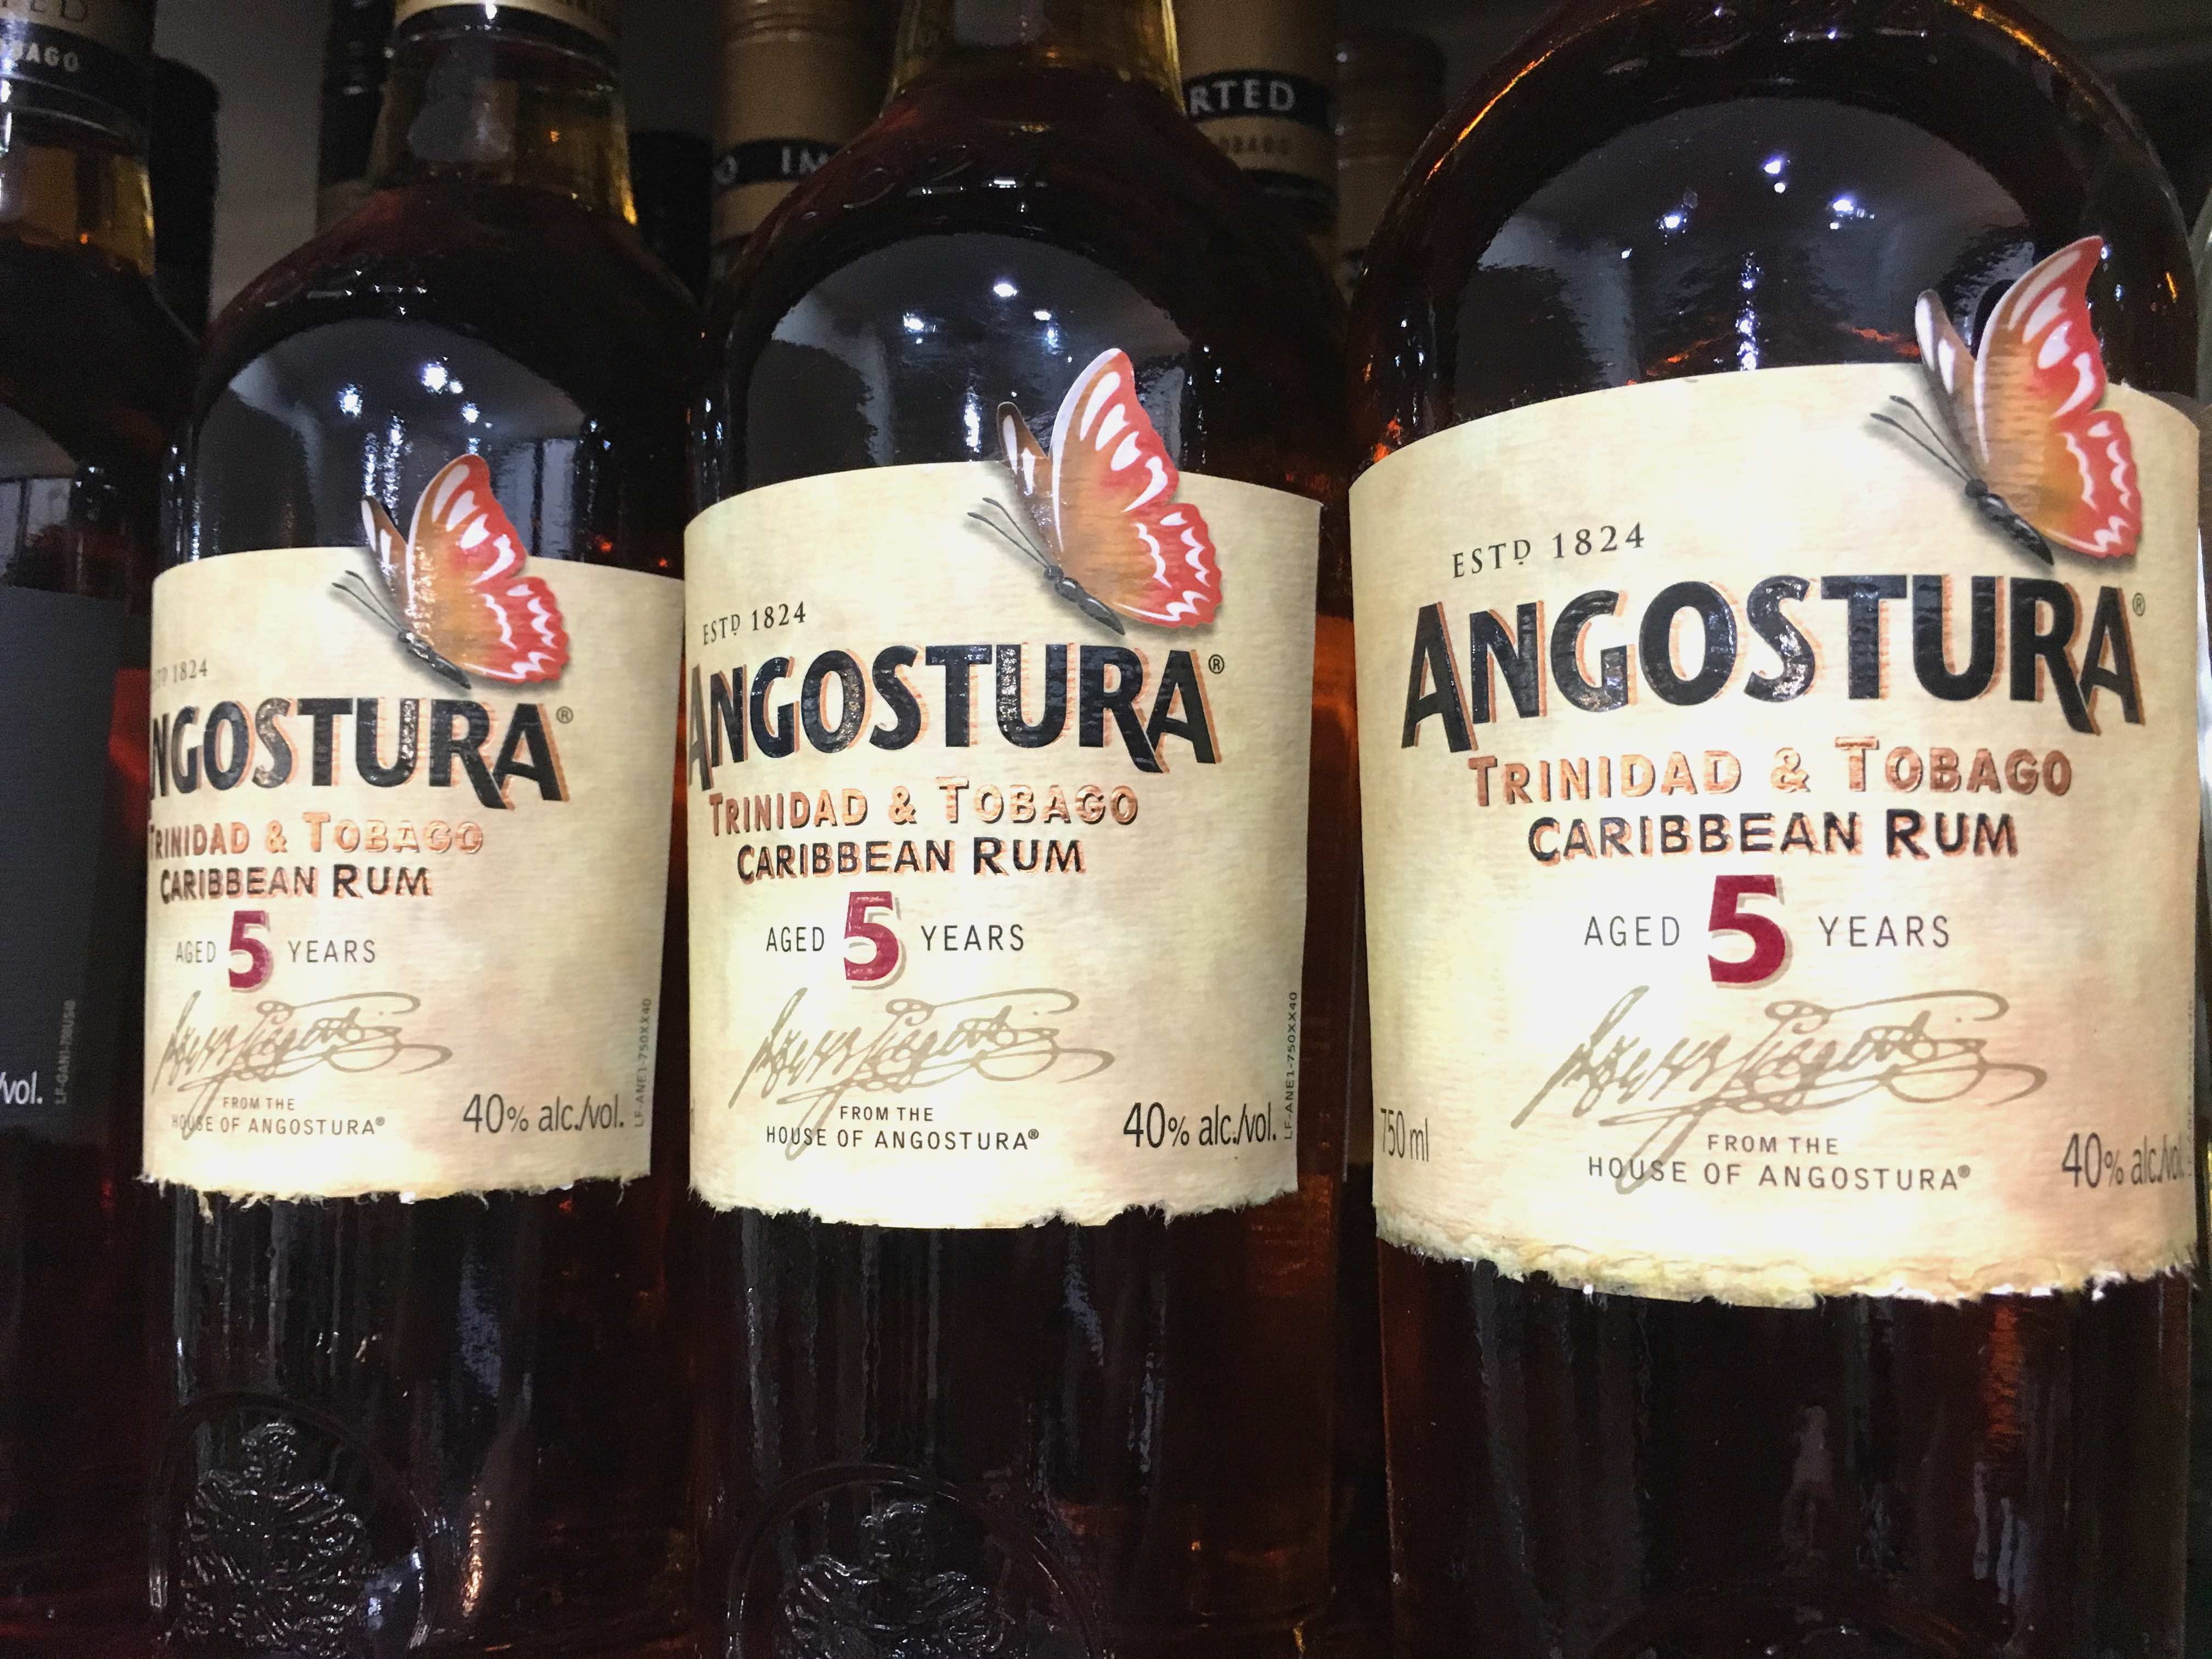 Uncover one of rum’s best kept secrets